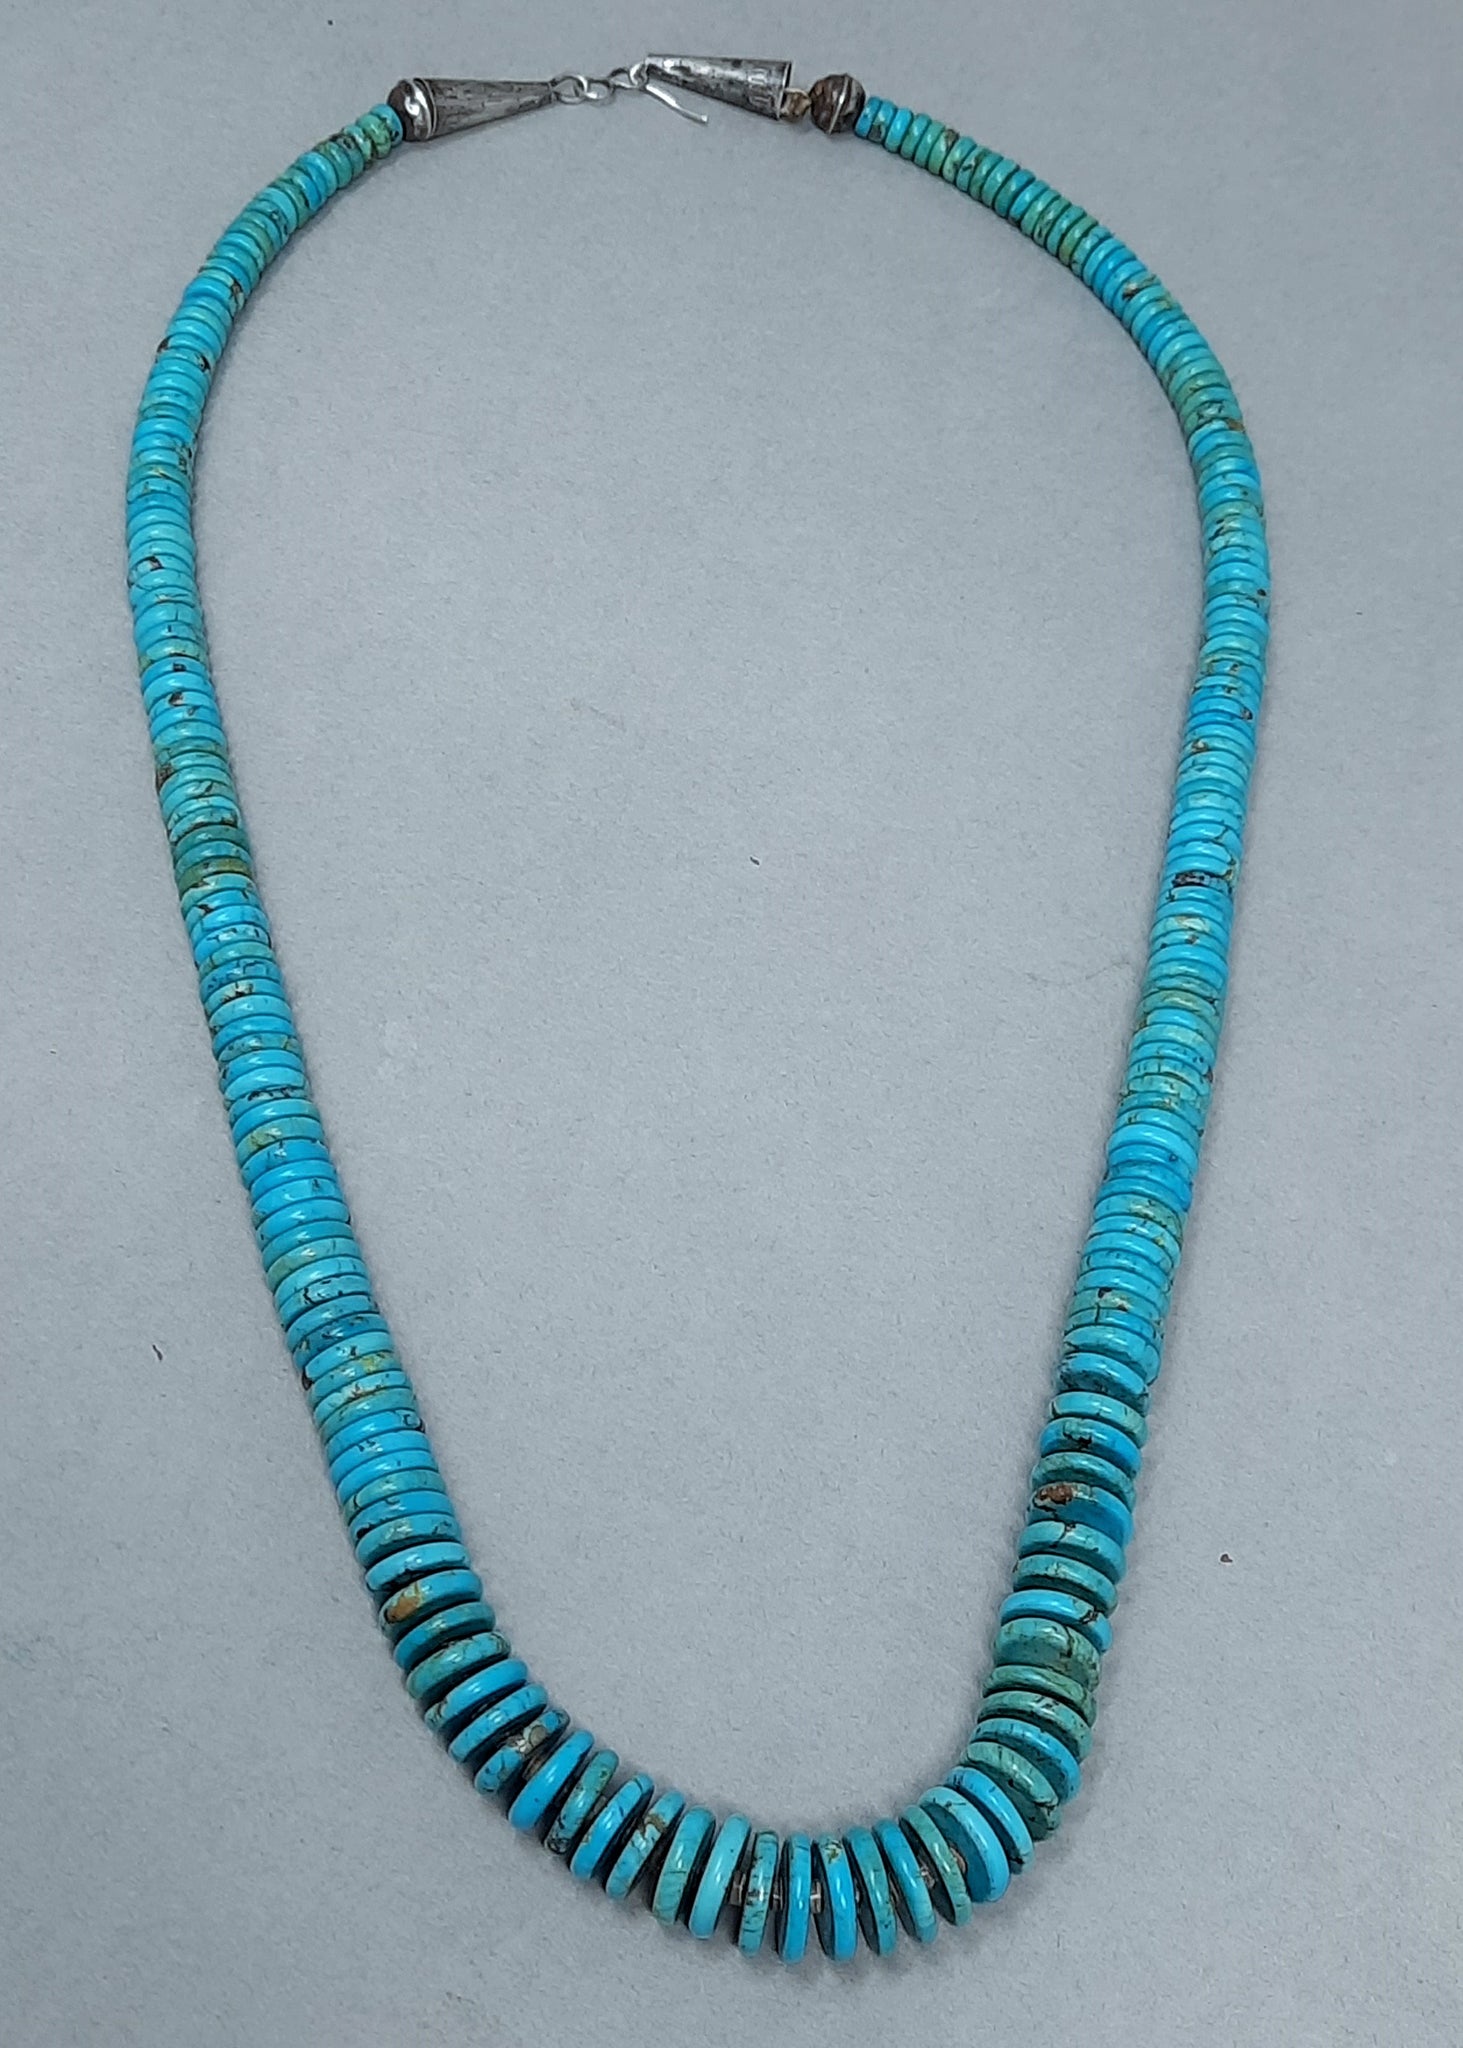 Vintage Turquoise Single Strand Disk Necklace 20 inch